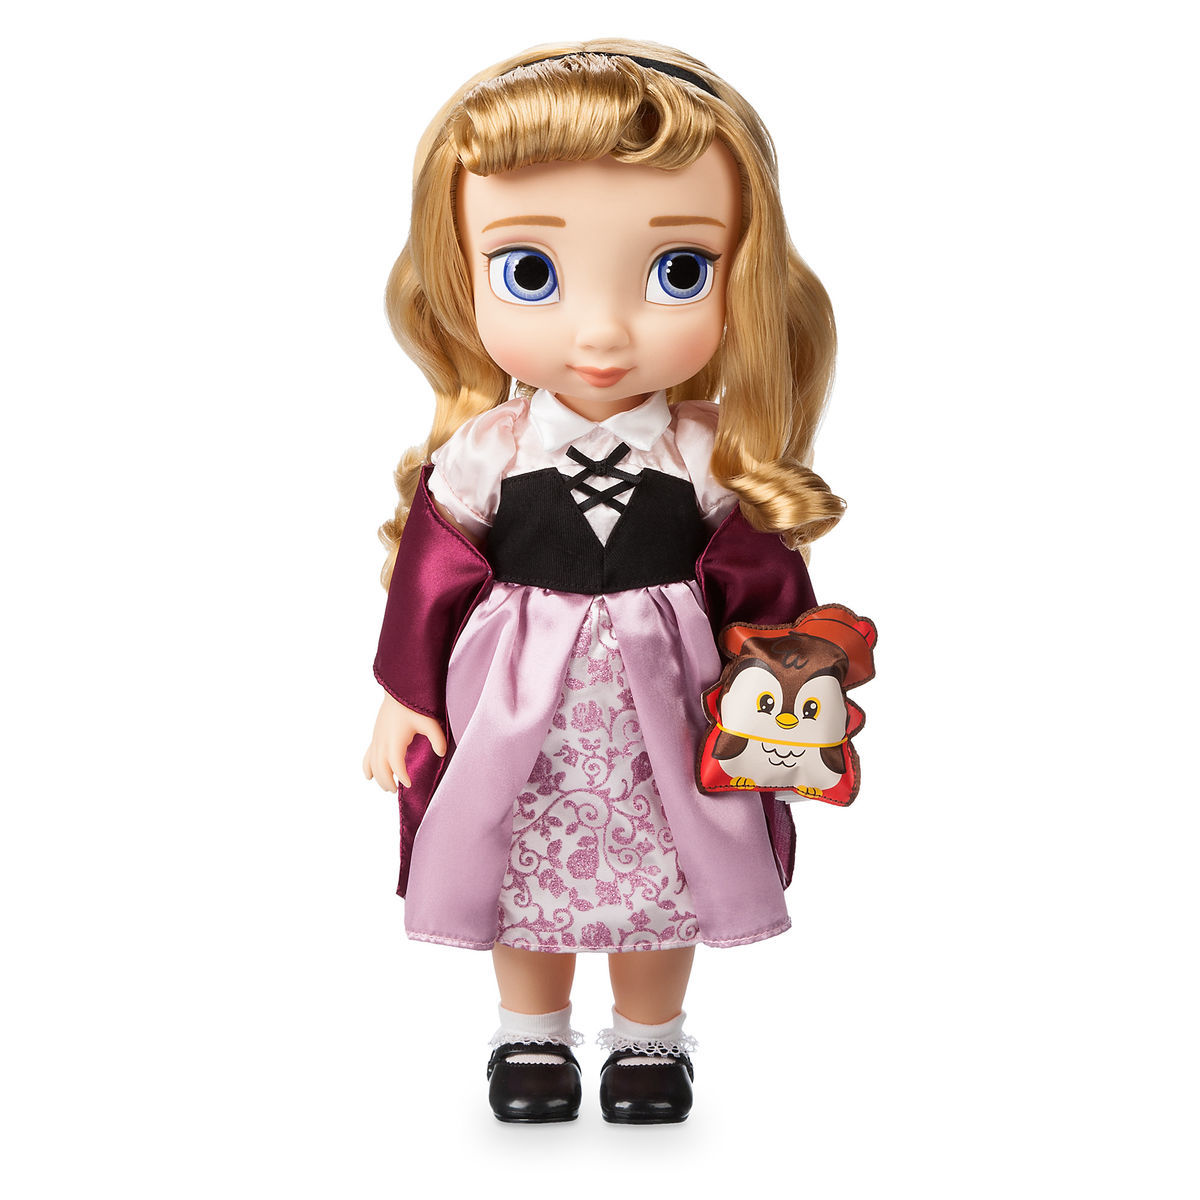 Disney 2019 Animators' Collection Aurora as Briar Rose with Owl Doll New w Box